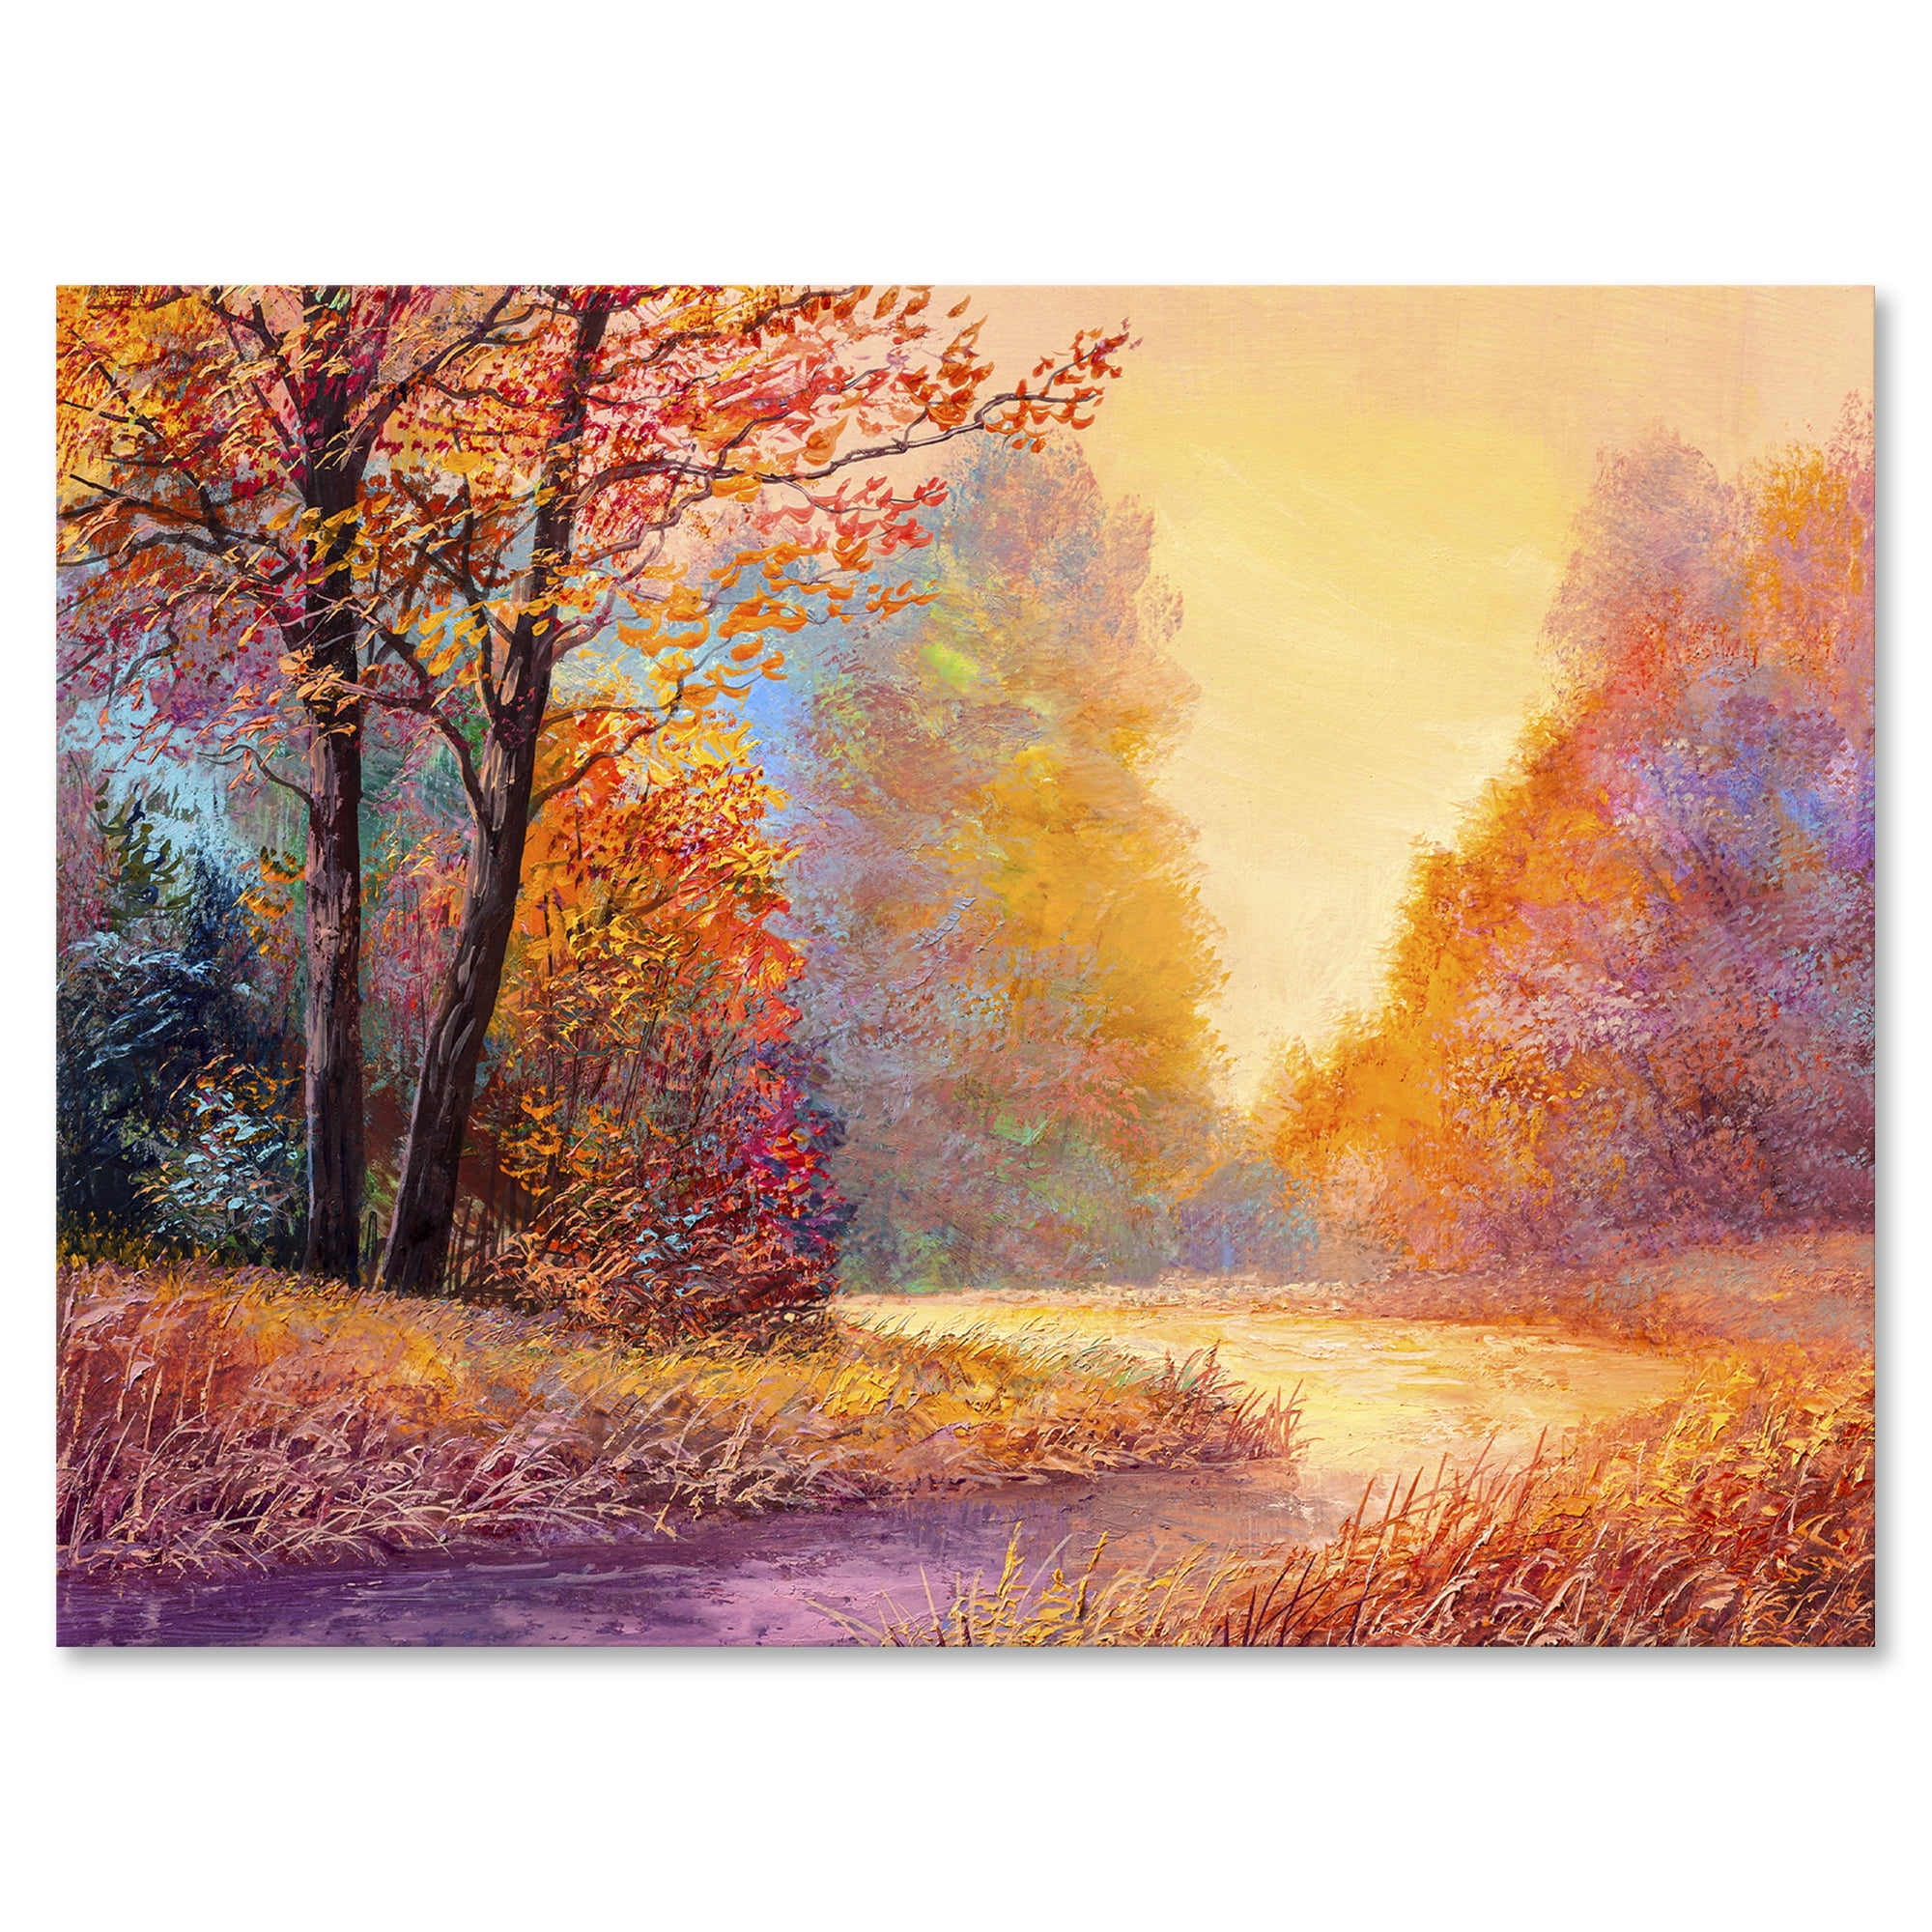 Red Fallen Leaves Forest Path Autumn Landscape Nature Art Poster 40"x24" 001 